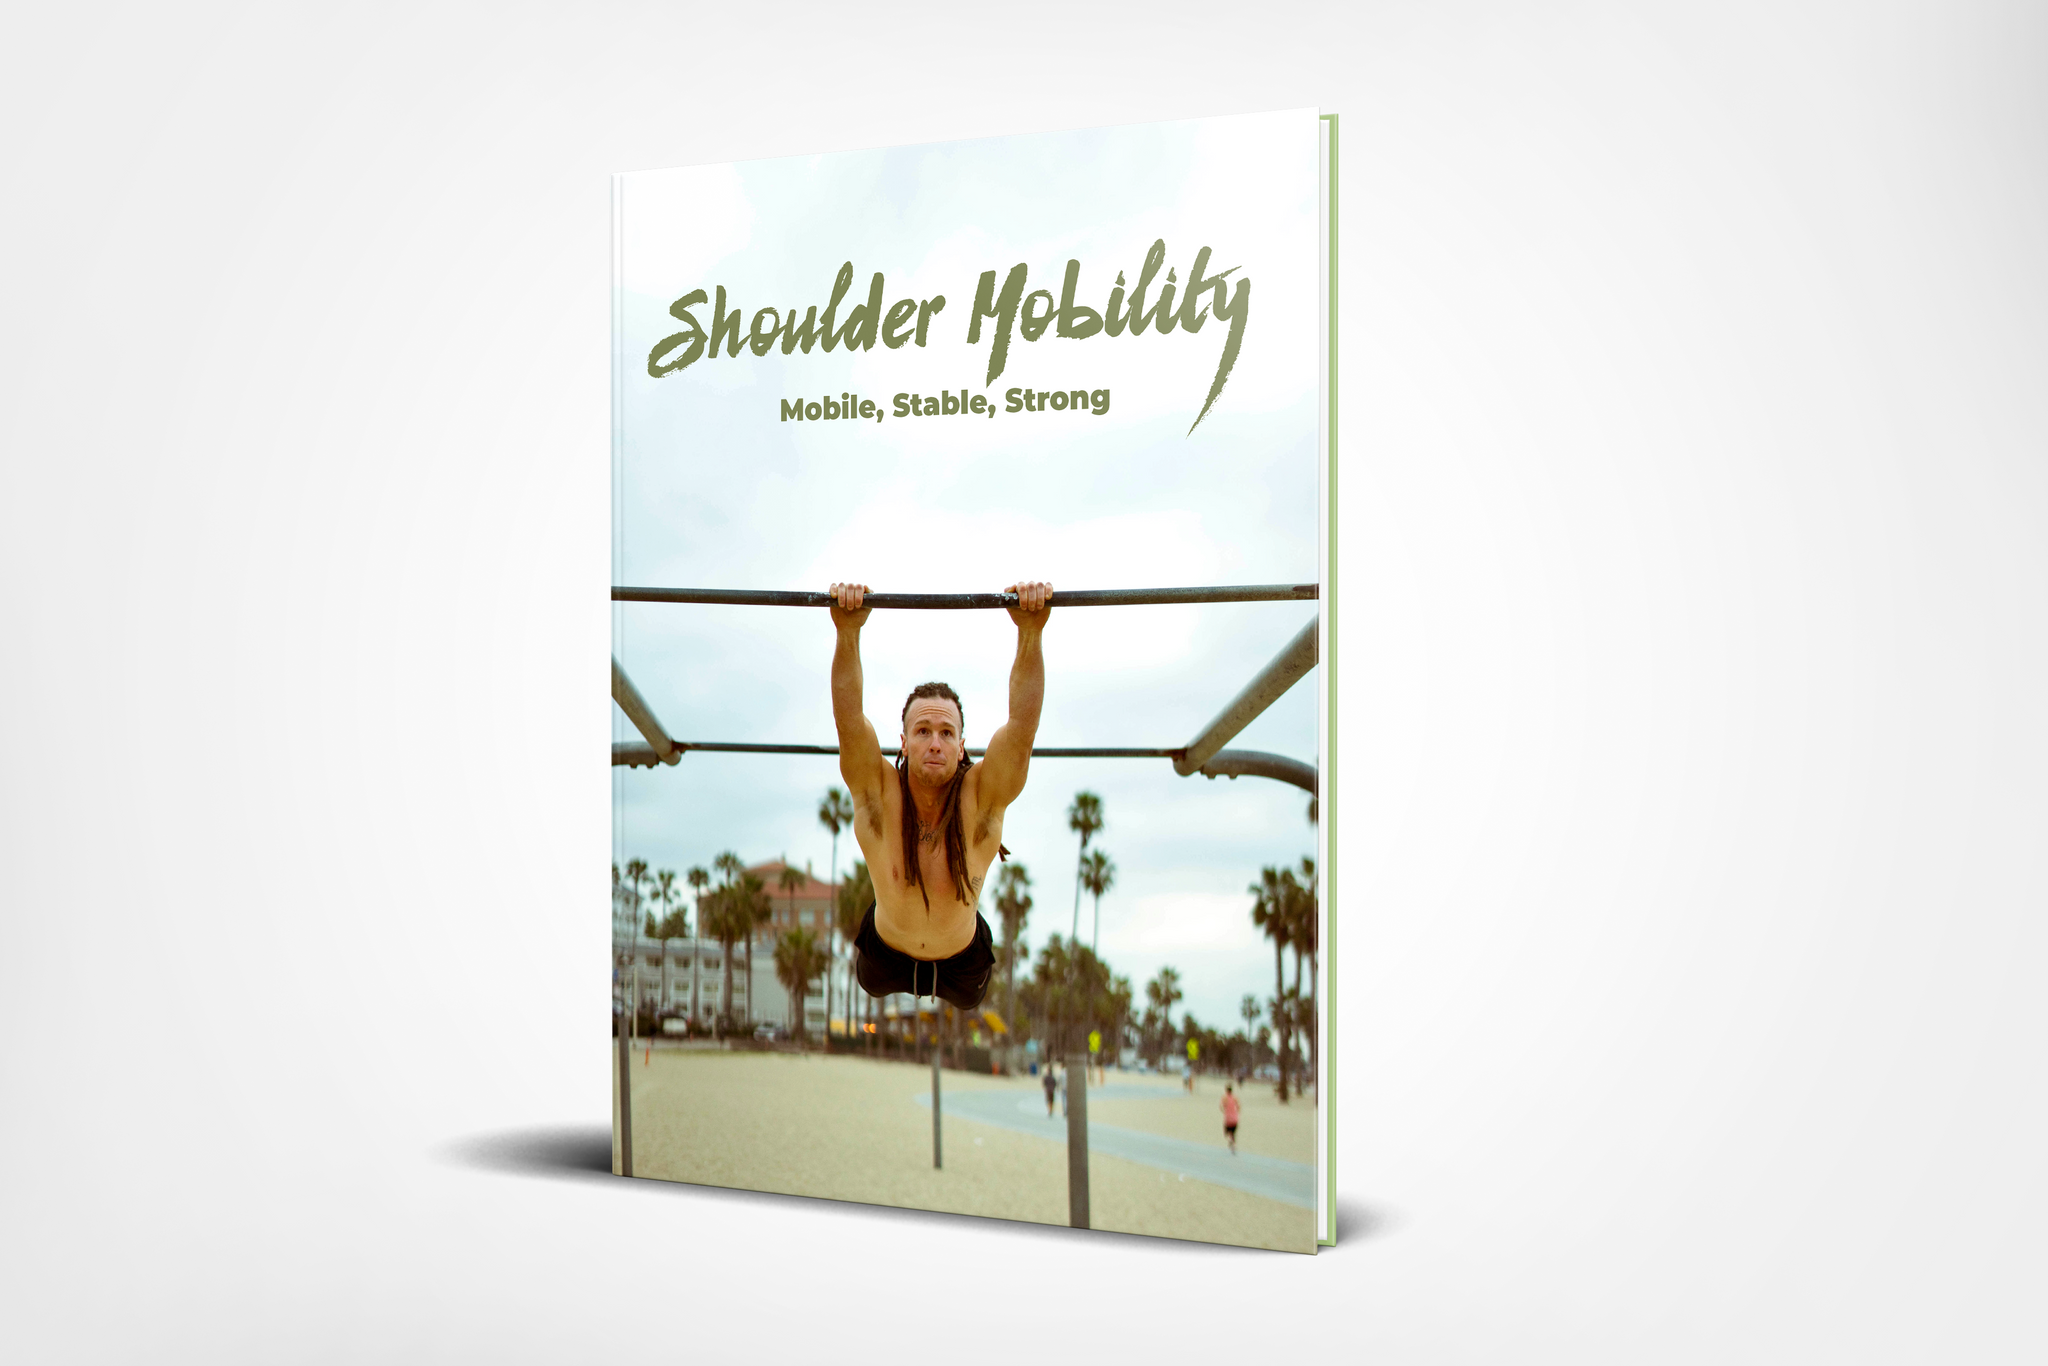 Shoulder Mobility: Mobile, Stable, Strong